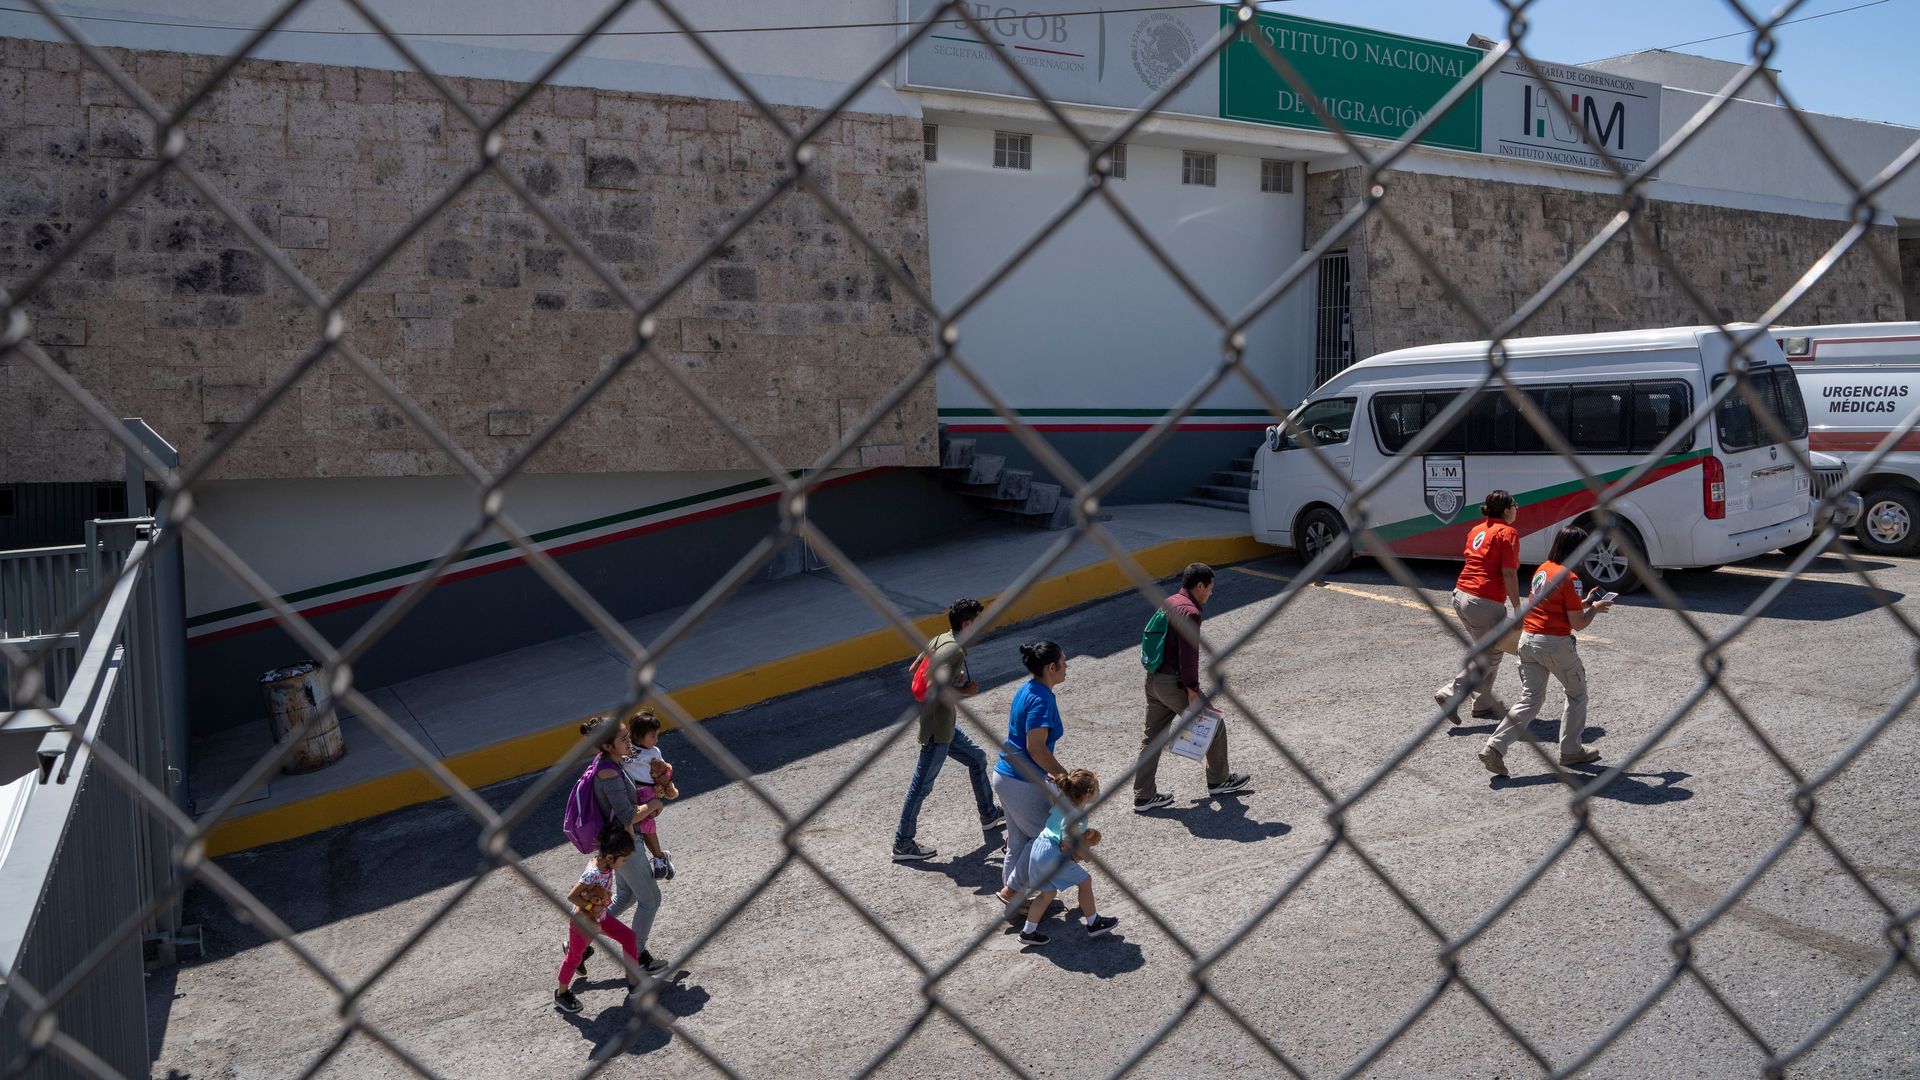 Migrants are led out of the National Institue of Migration in downtown Ciudad Juarez, Mexico. Seen through a chain link fence.